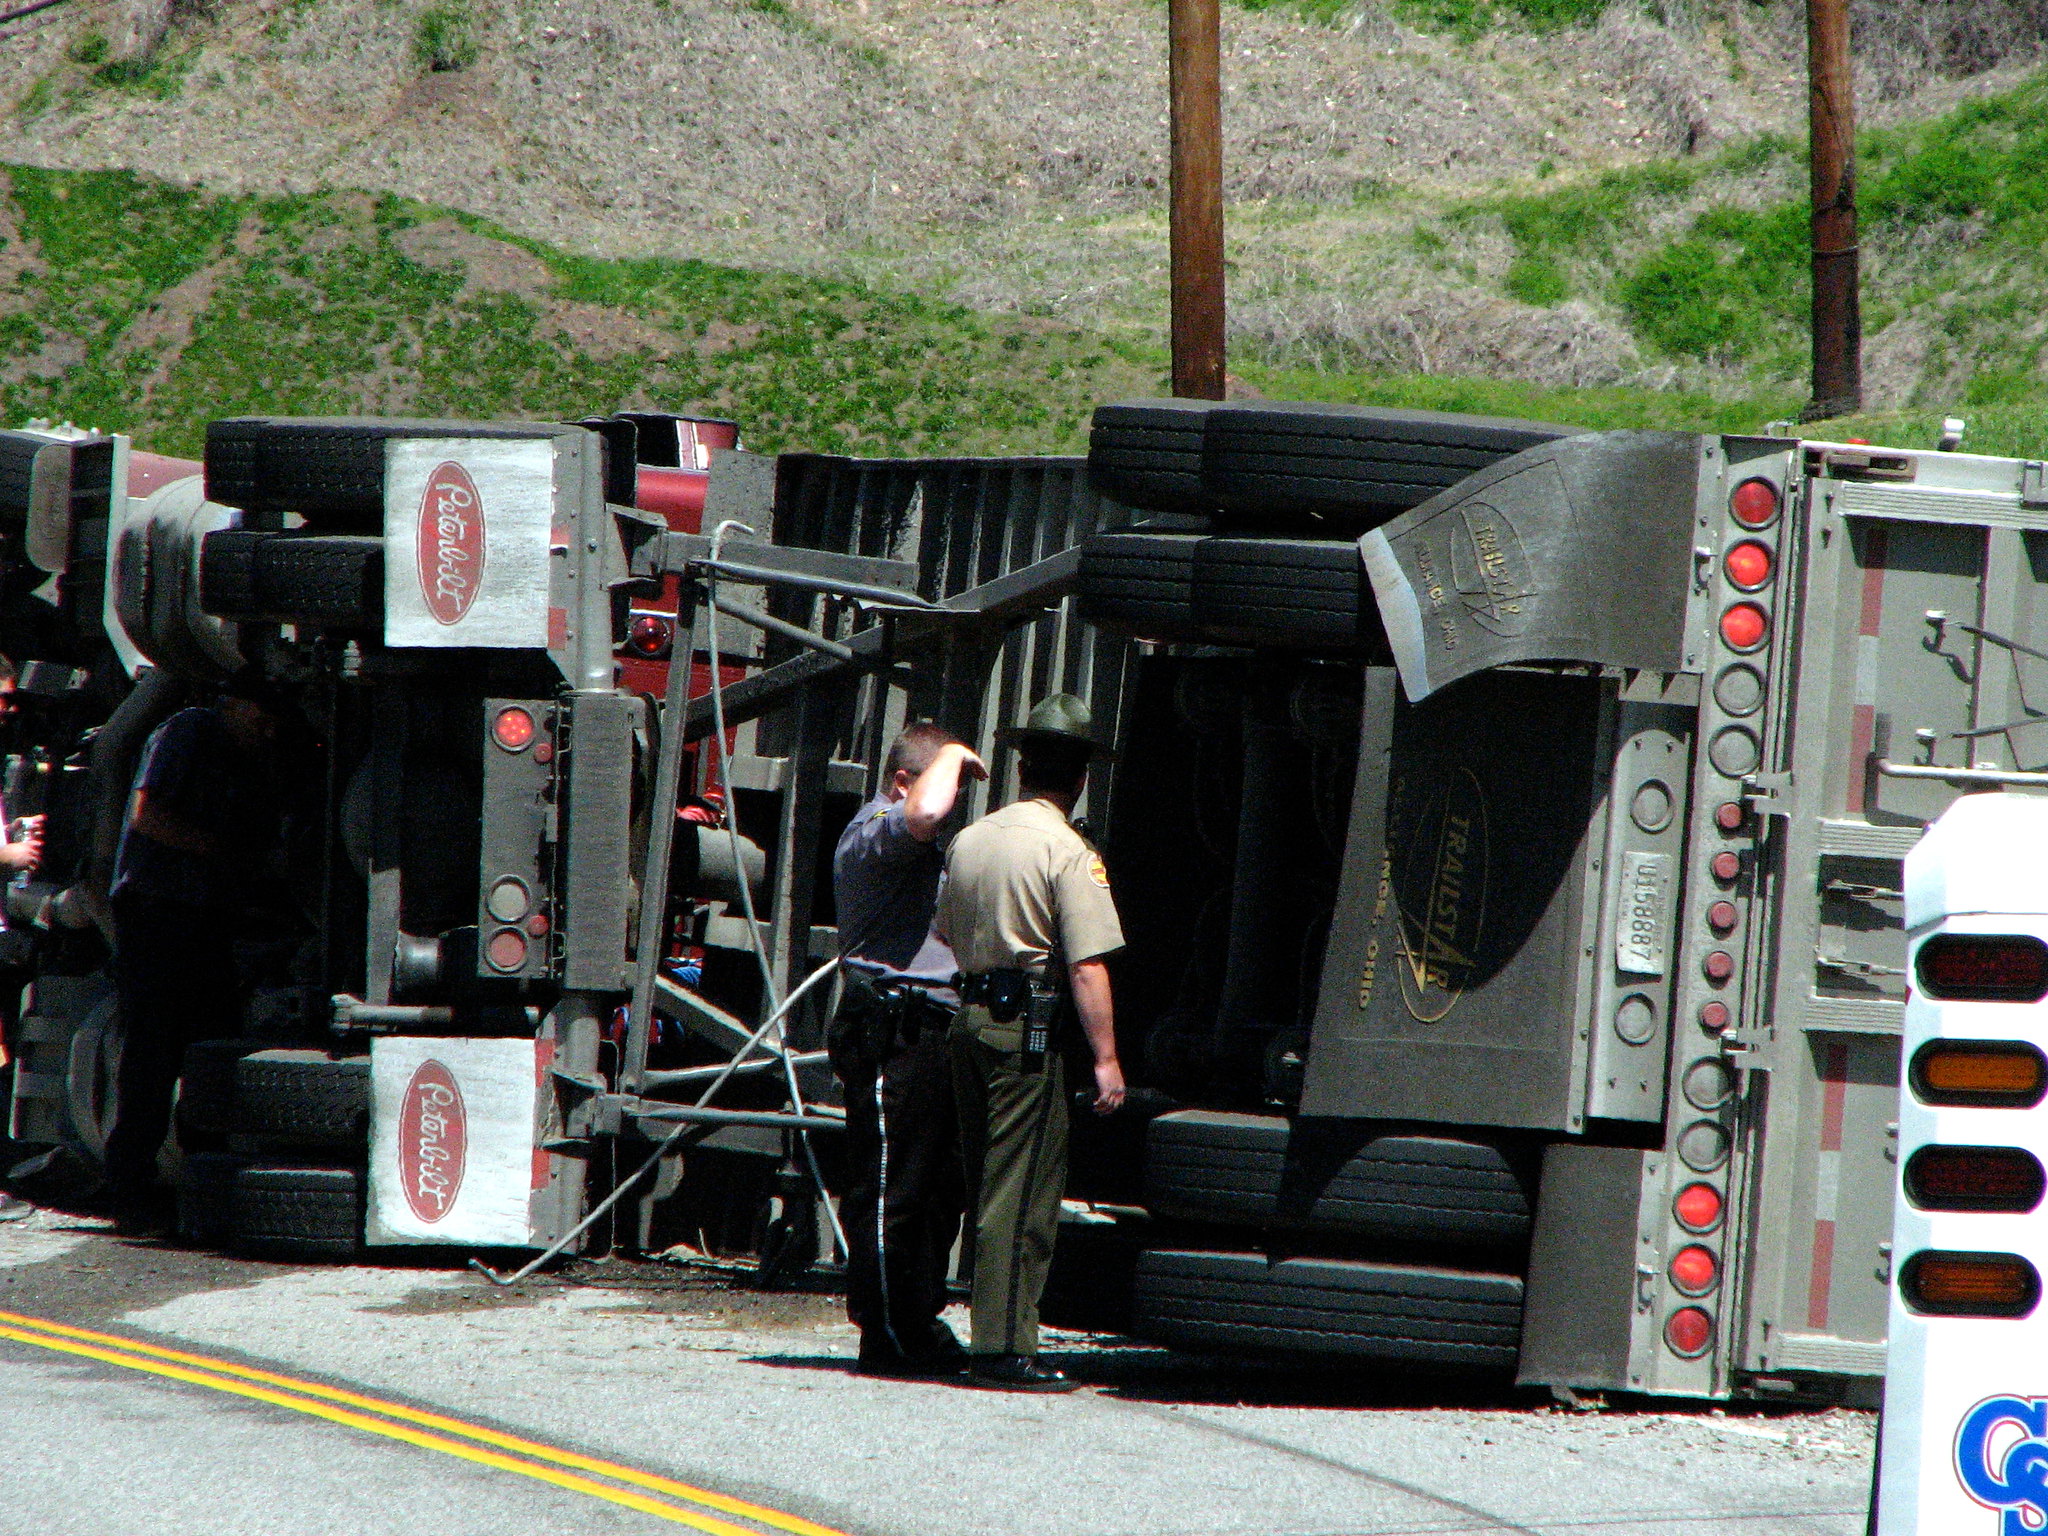 Coal truck accident; image by Michael Hodge, via Flickr, CC BY 2.0.